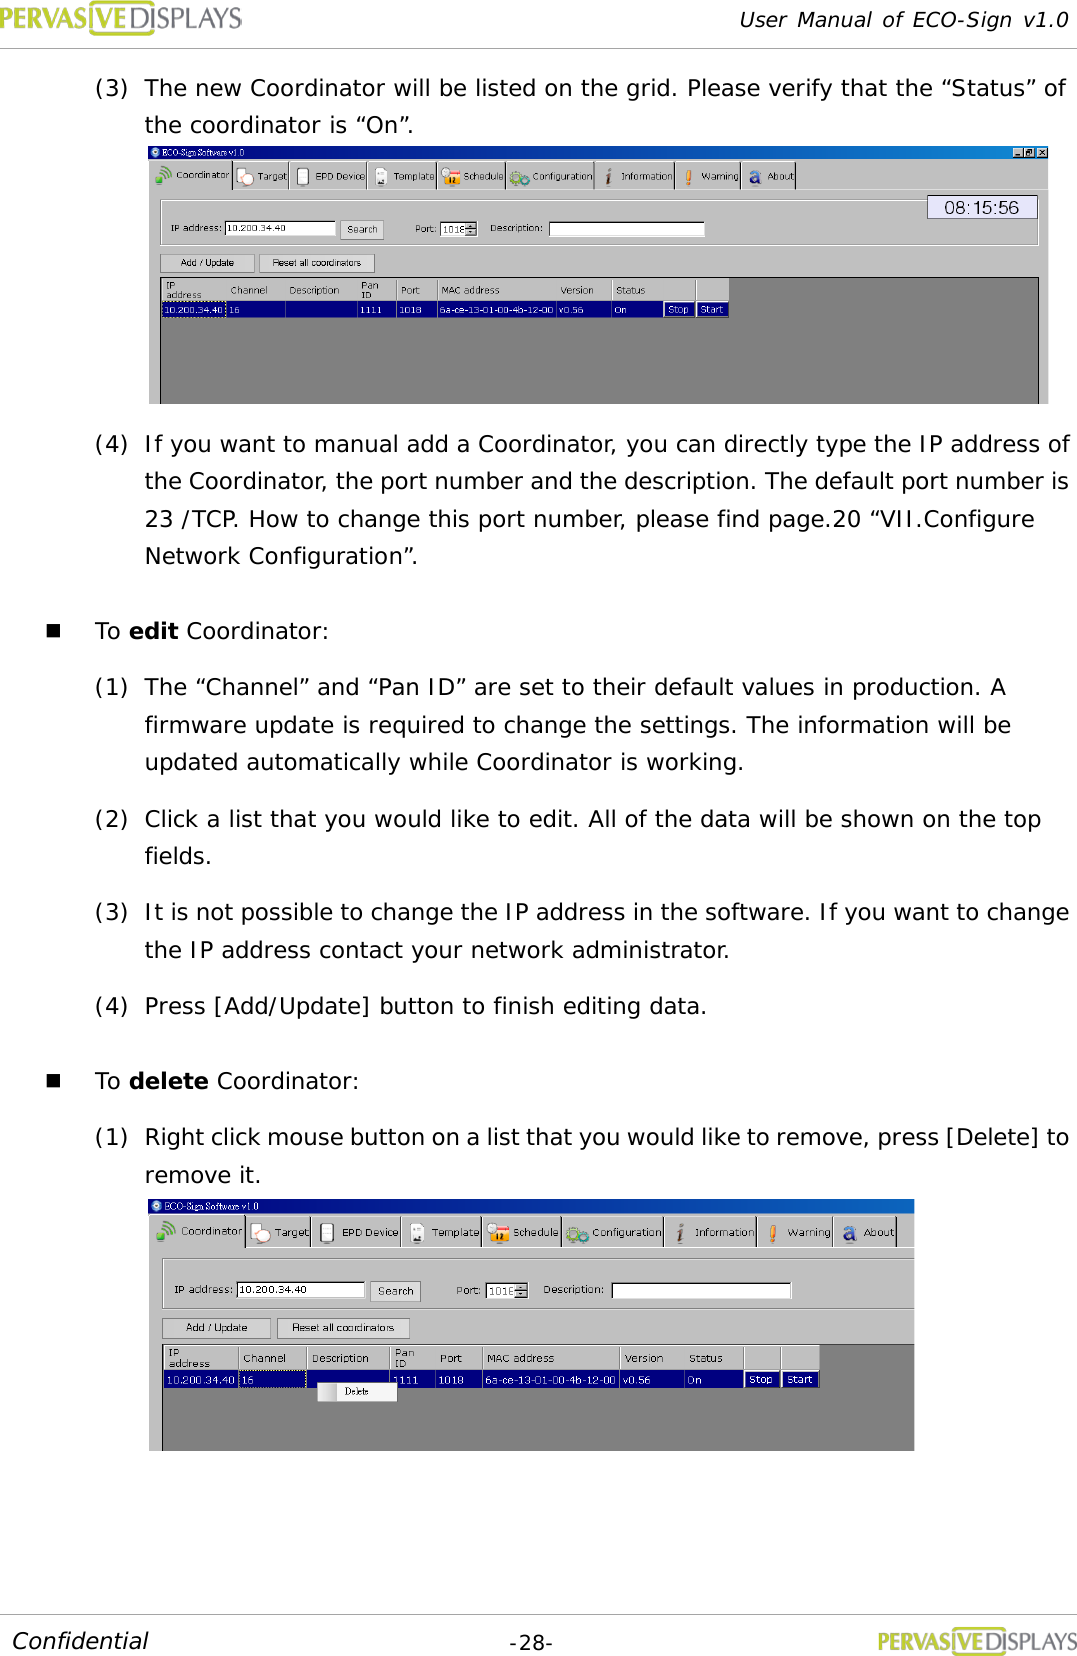 User Manual of ECO-Sign v1.0  -28- Confidential (3) The new Coordinator will be listed on the grid. Please verify that the “Status” of the coordinator is “On”.  (4) If you want to manual add a Coordinator, you can directly type the IP address of the Coordinator, the port number and the description. The default port number is 23 /TCP. How to change this port number, please find page.20 “VII.Configure Network Configuration”.  To edit Coordinator: (1) The “Channel” and “Pan ID” are set to their default values in production. A firmware update is required to change the settings. The information will be updated automatically while Coordinator is working. (2) Click a list that you would like to edit. All of the data will be shown on the top fields. (3) It is not possible to change the IP address in the software. If you want to change the IP address contact your network administrator. (4) Press [Add/Update] button to finish editing data.  To delete Coordinator: (1) Right click mouse button on a list that you would like to remove, press [Delete] to remove it.    